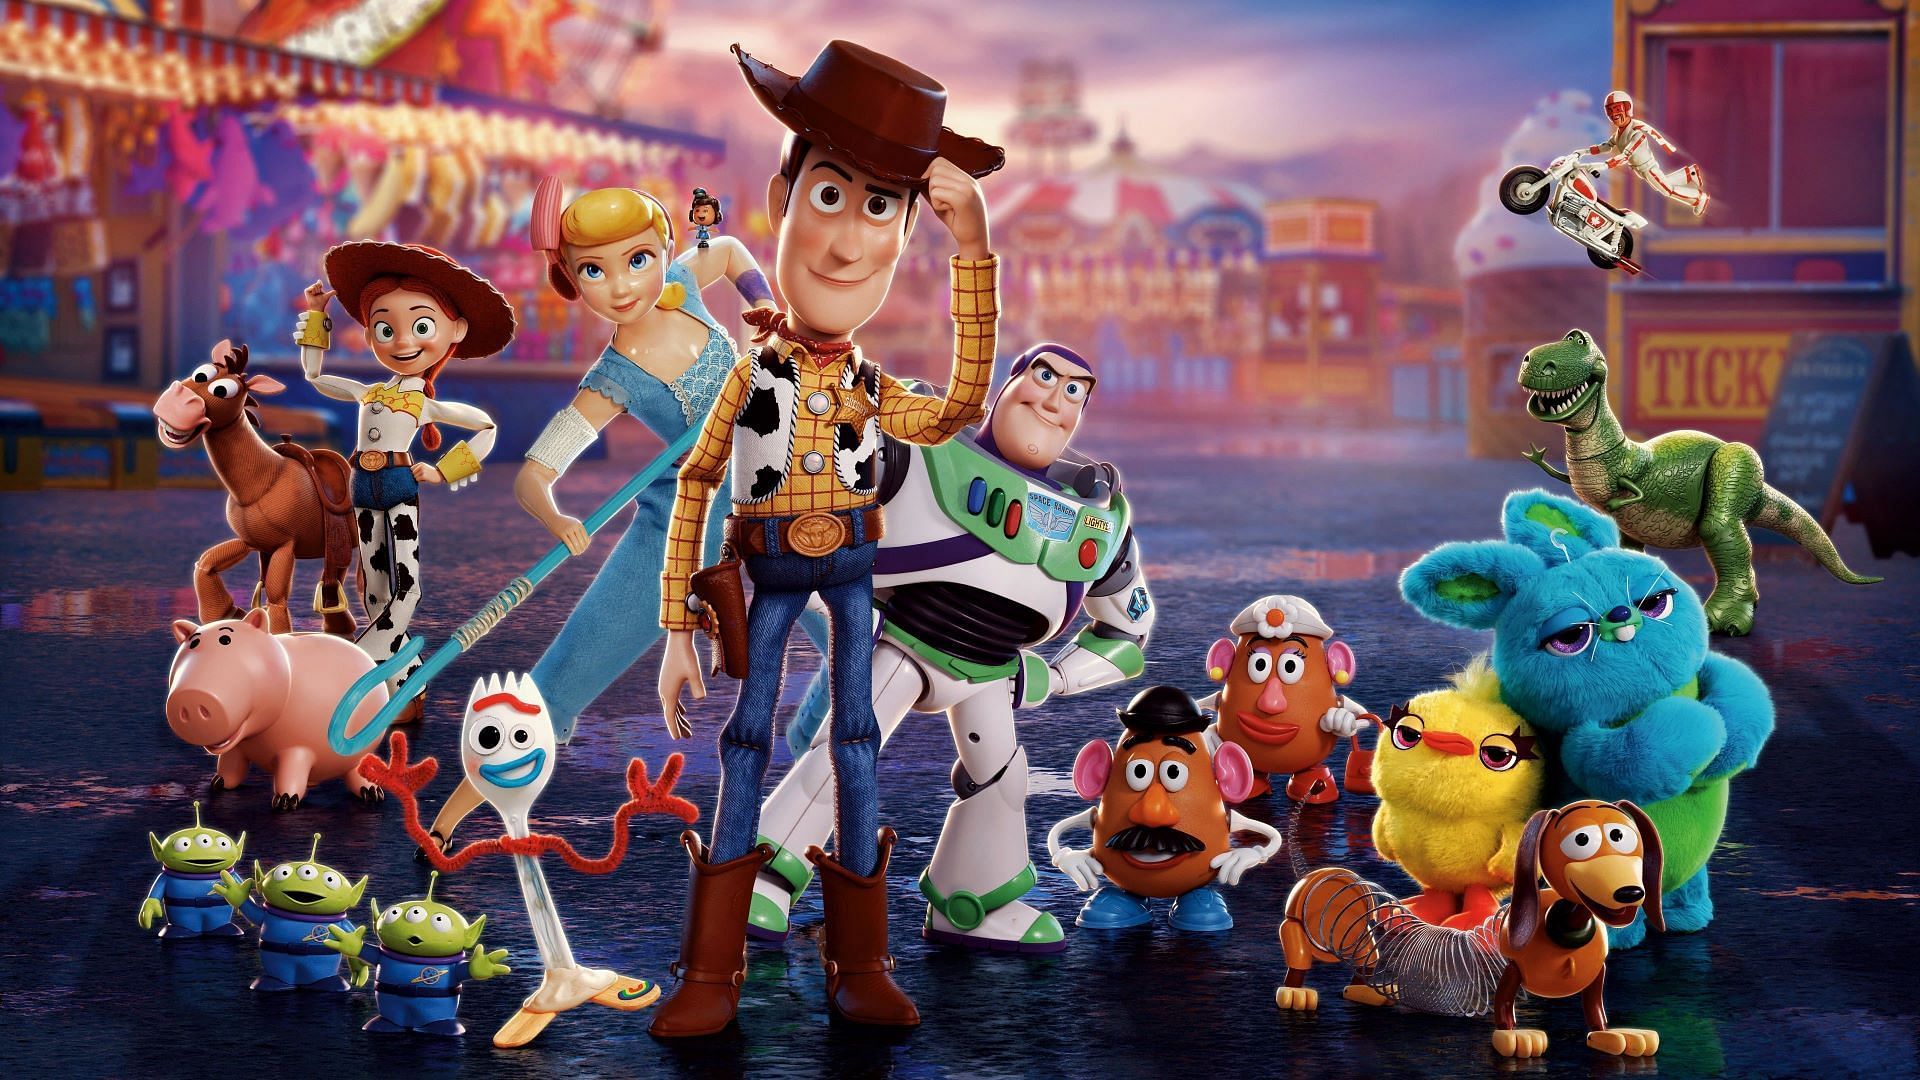 Disney announces Toy Story 5 for 2024 - C19 World's Latest News